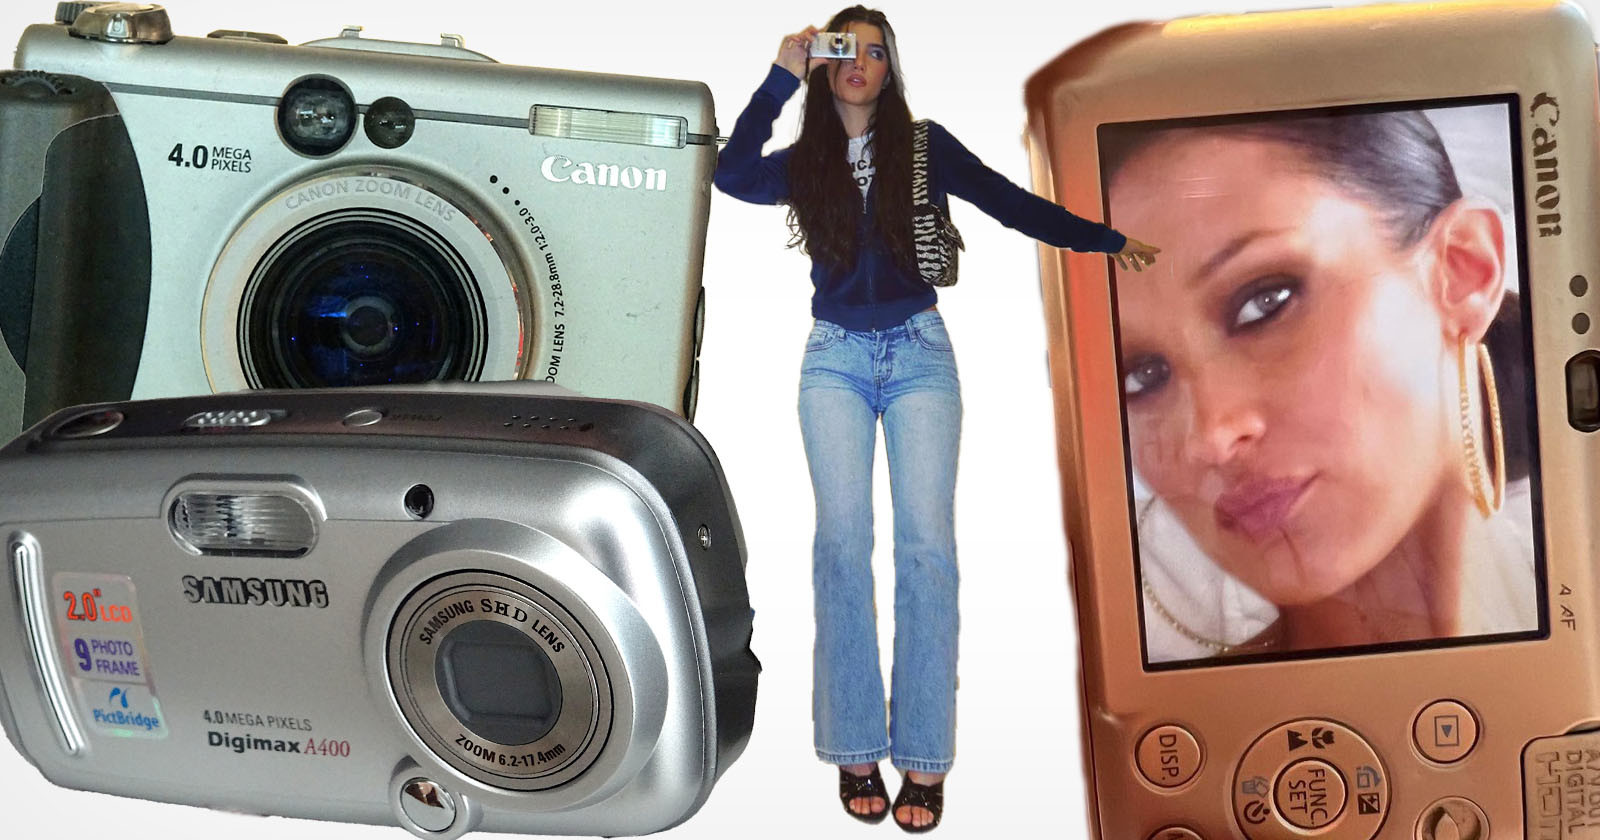 Gen Z is Bringing Back Digital Cameras of the Early 2000s